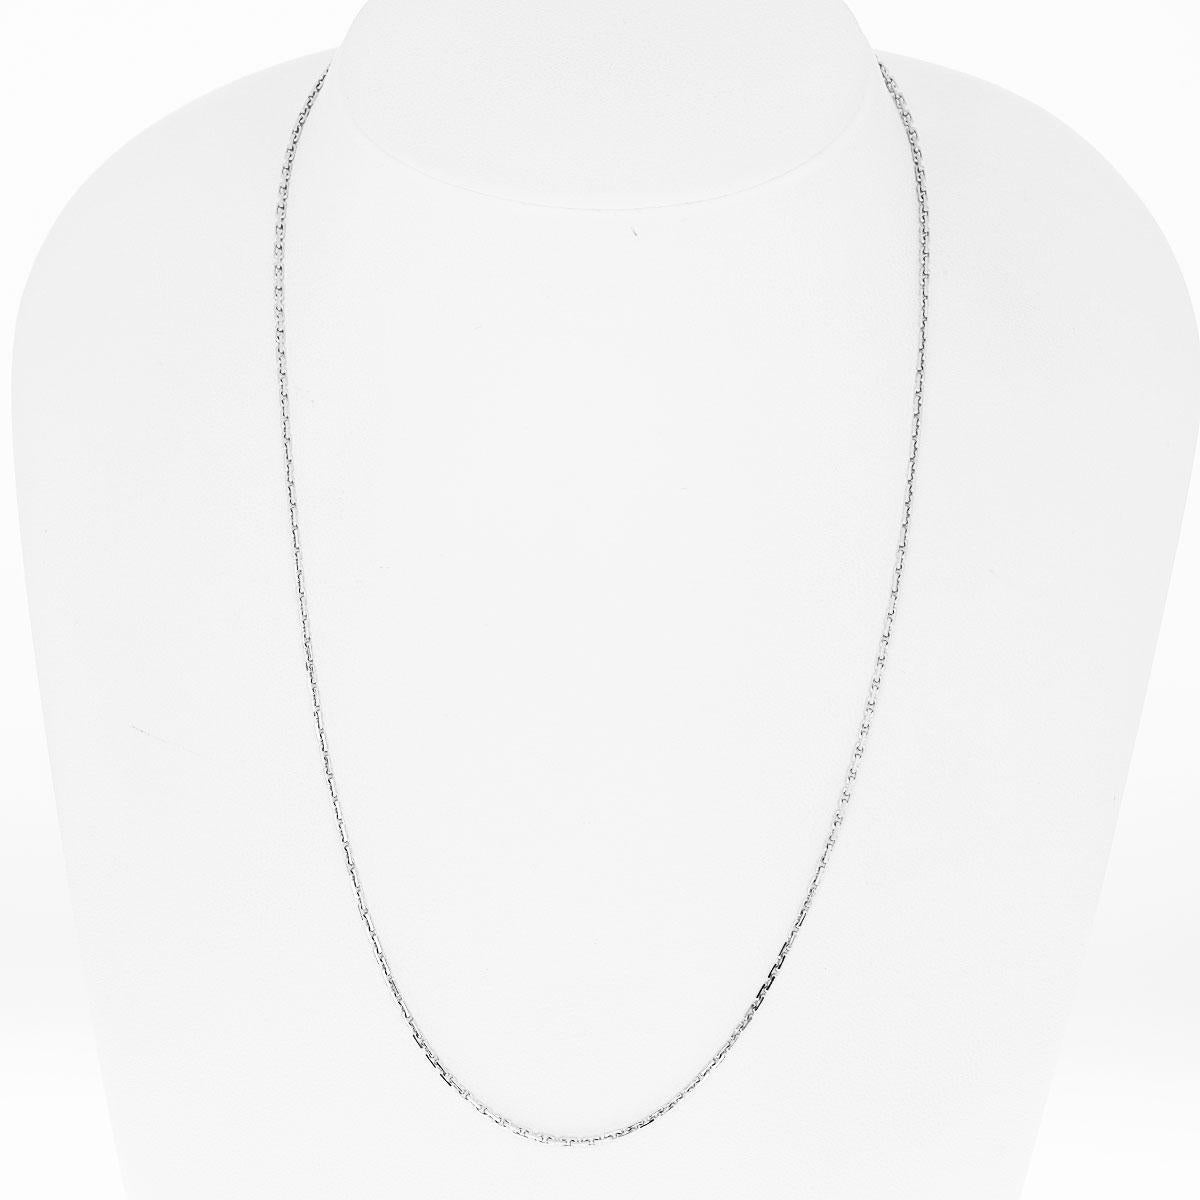 Brand:Cartier
Name:Link chain necklace
Material:750 K18 WG white gold
Weight:5.3g(Approx)
neck around:42cm / 16.53